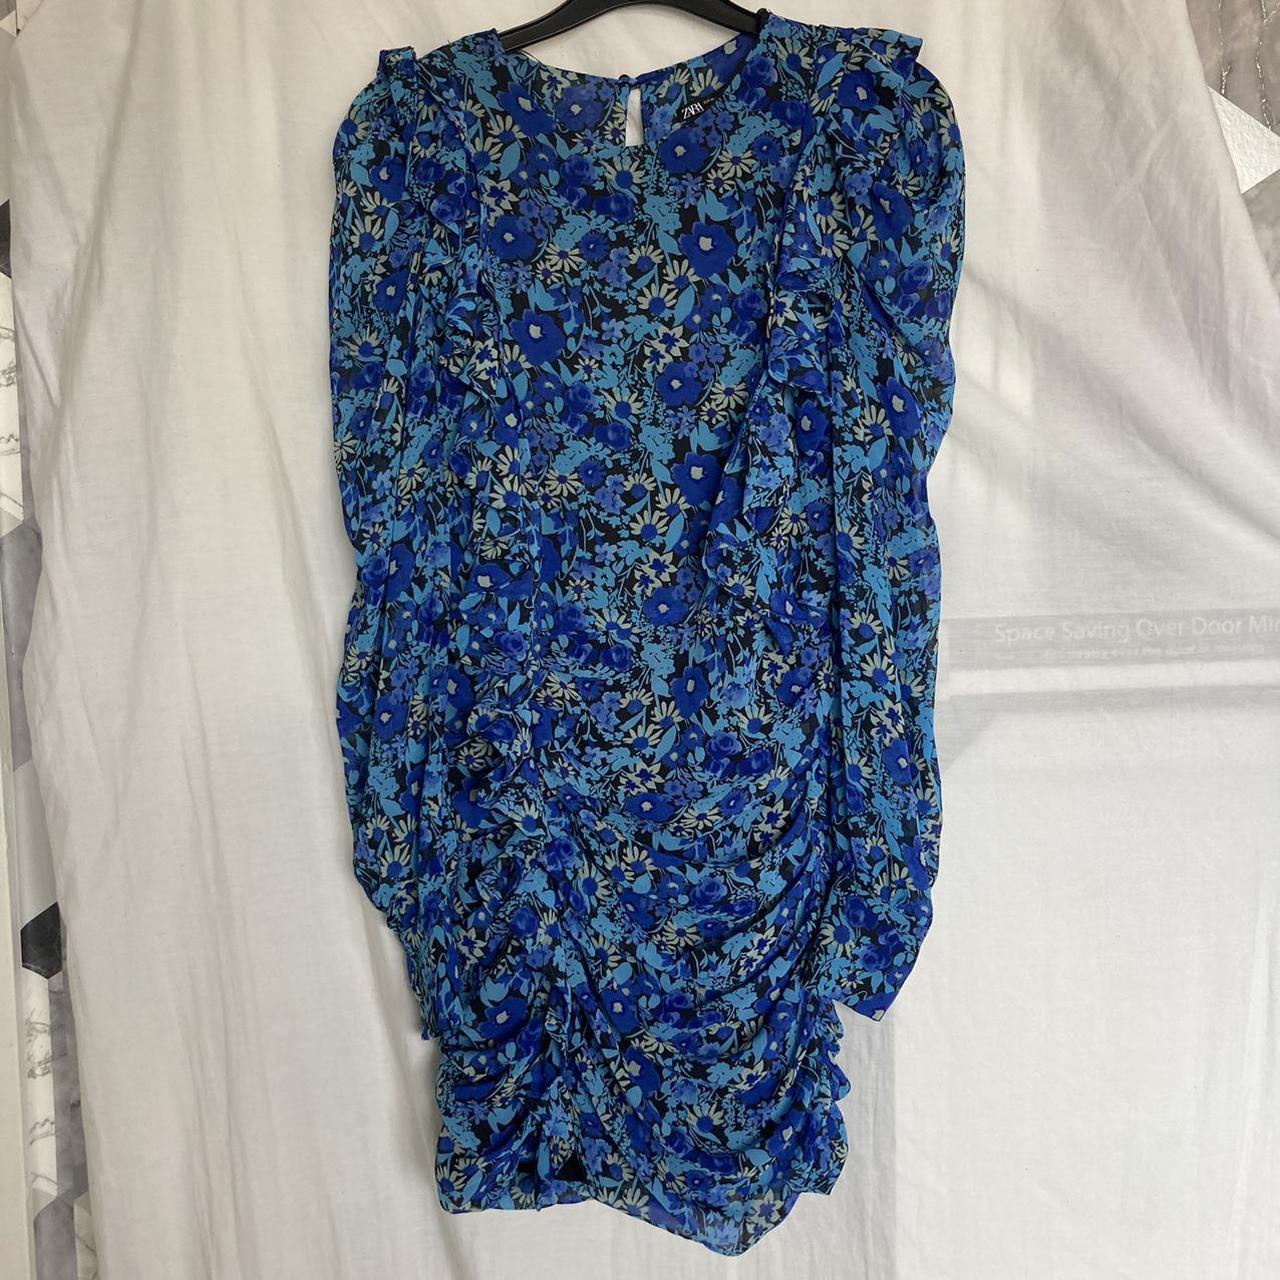 Zara blue floral dress with open back detail and... - Depop